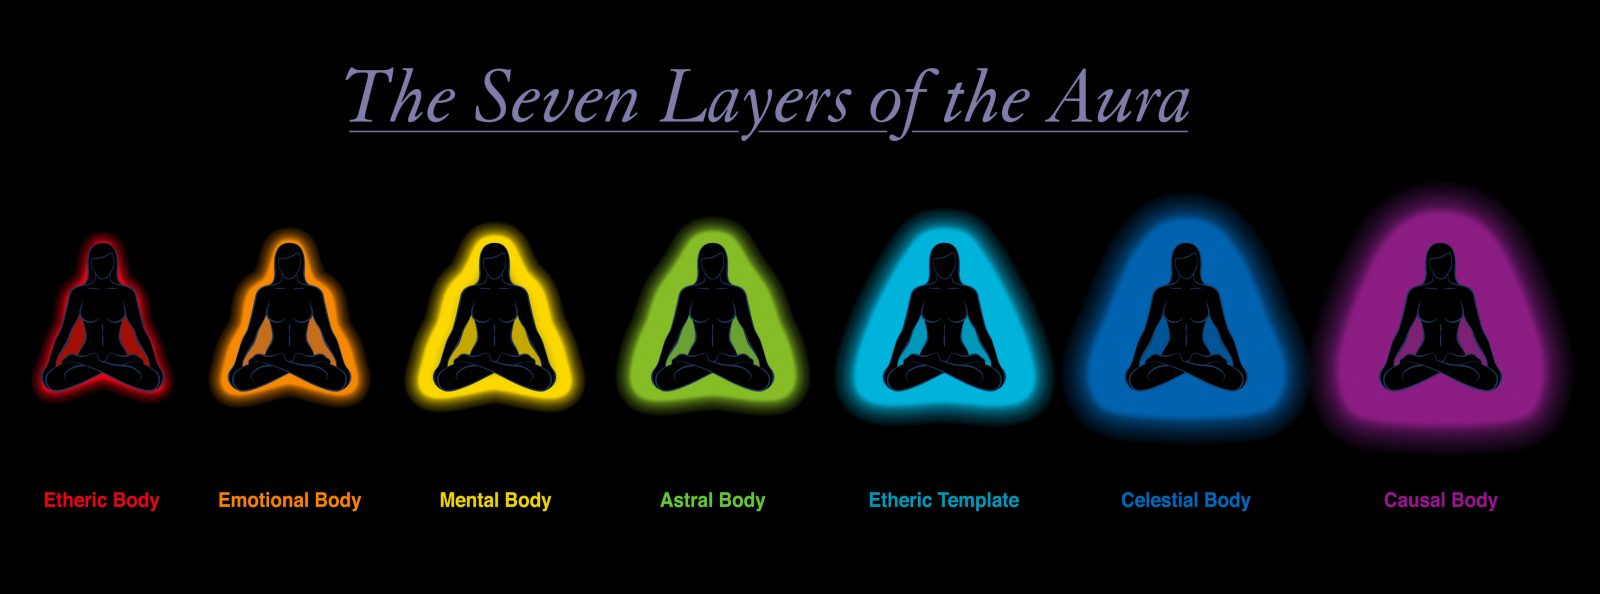 A diagram of the seven layers of the aura, with each layer represented by a different color and associated with a different aspect of the human experience, from the physical to the spiritual.